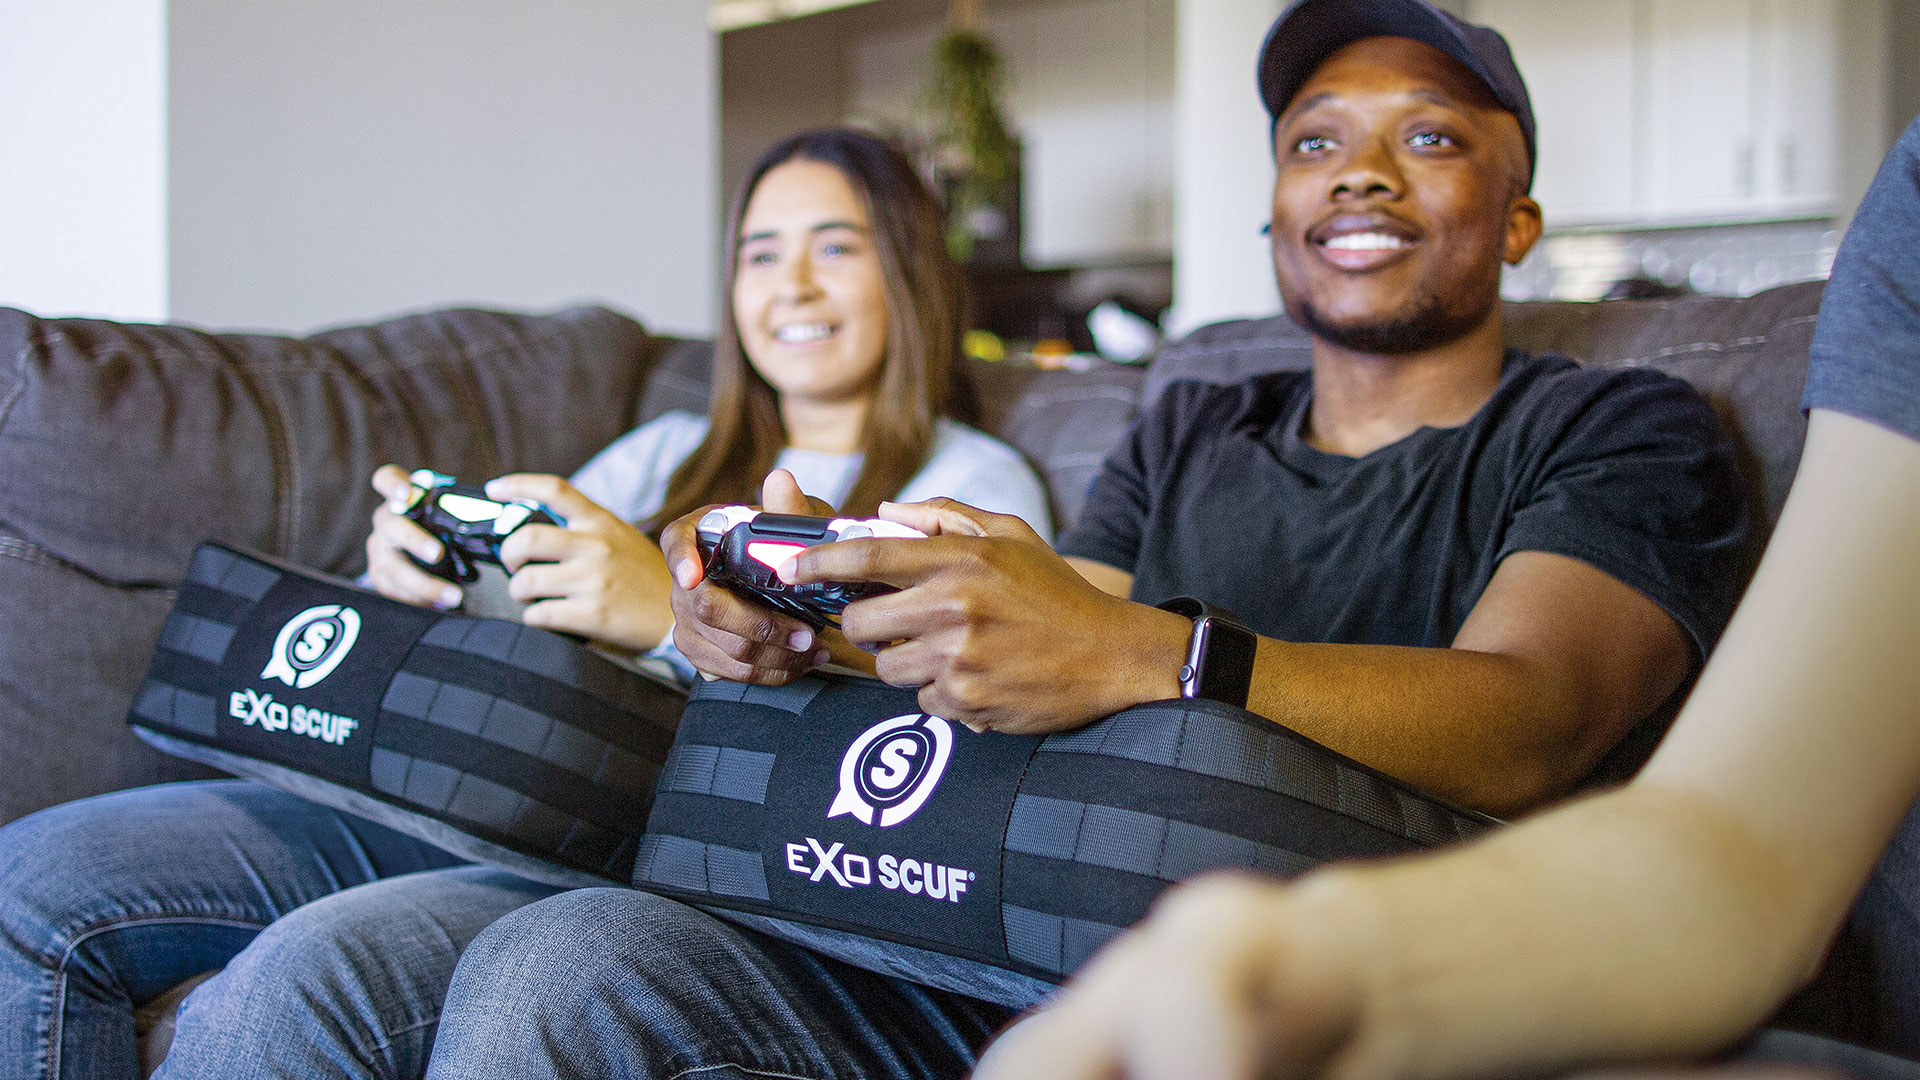 Exo Scuf Gaming Cushion Review. Is it worth it to help your back